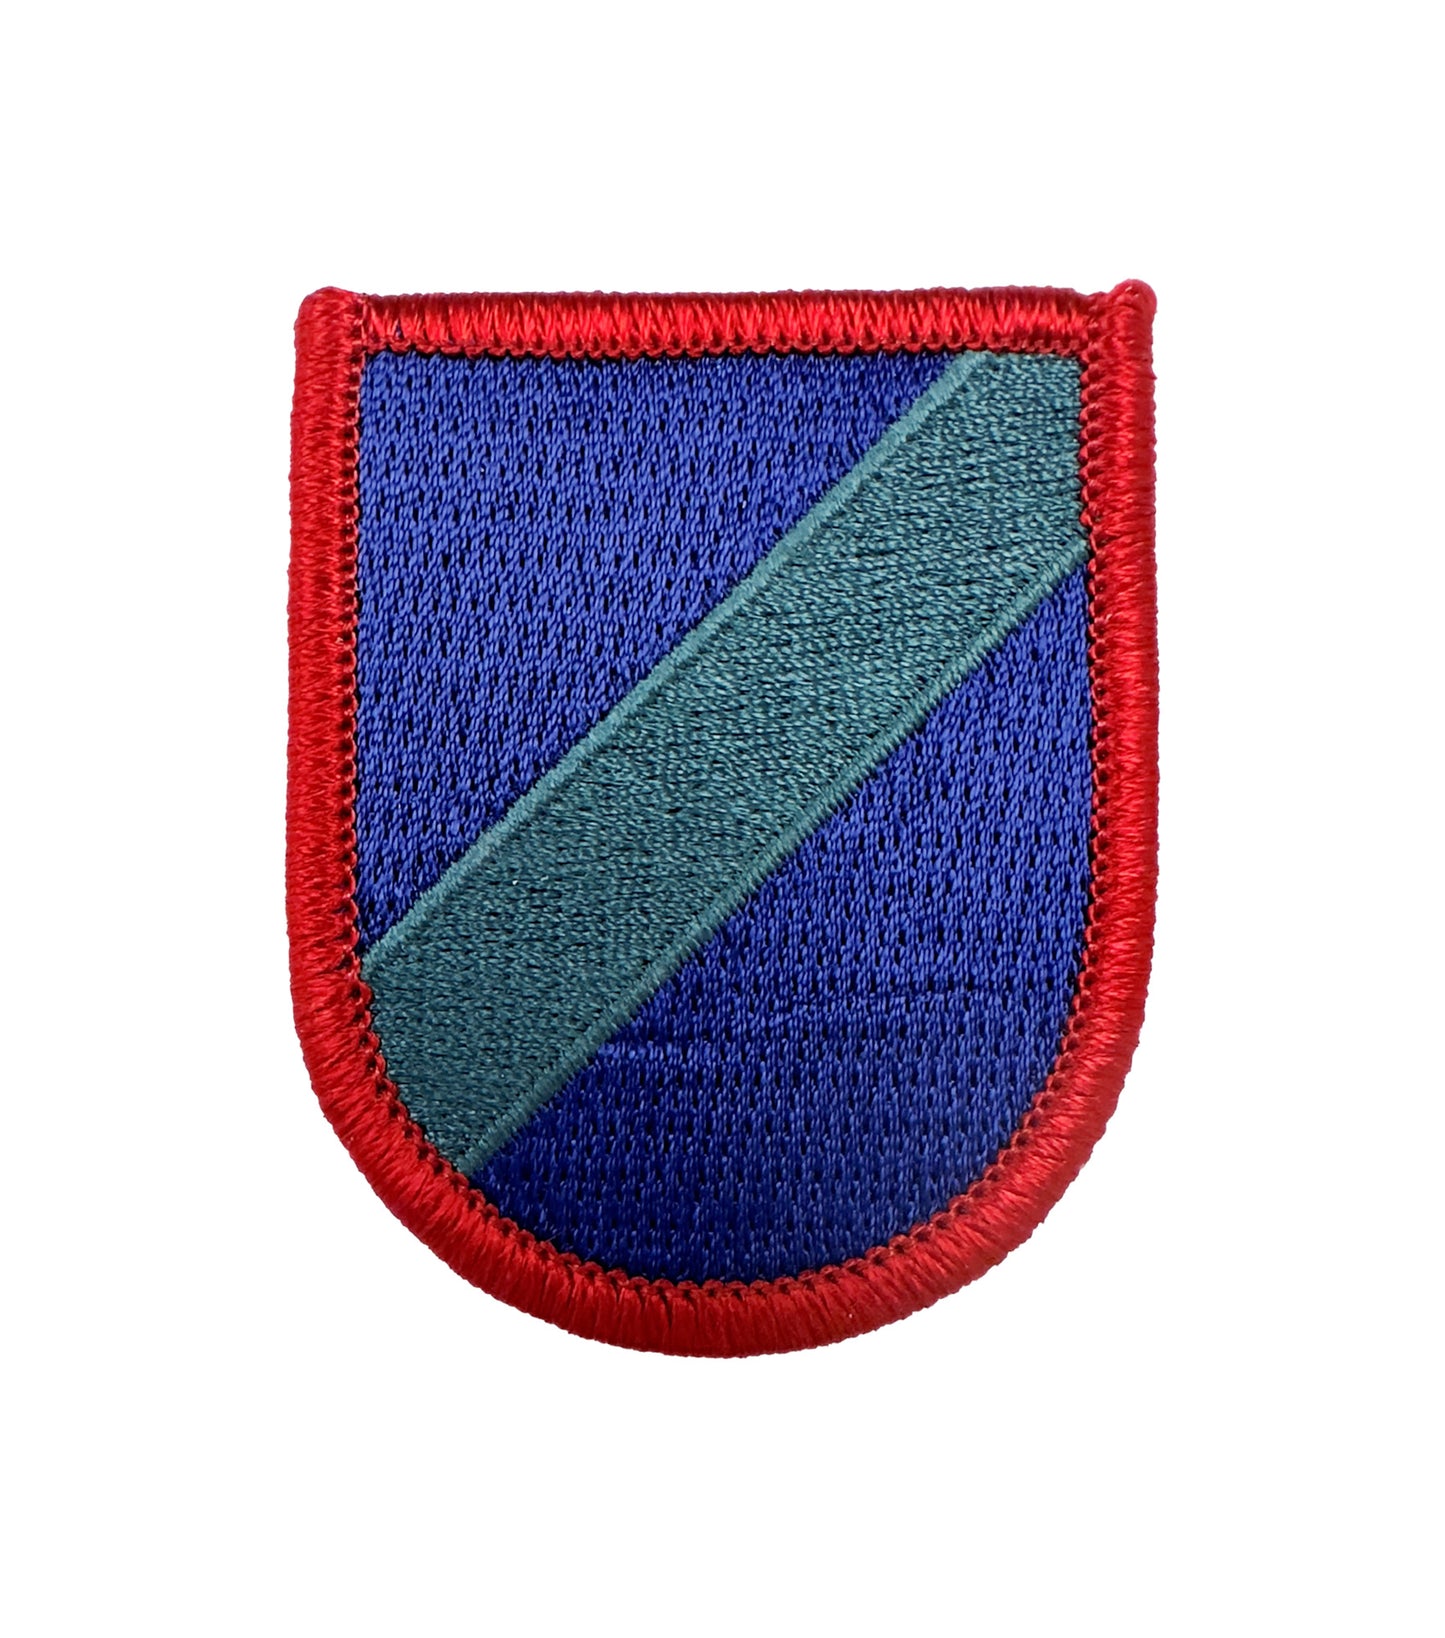 US Army 82nd Airborne Division 3rd Brigade Combat Team Special Troops Battalion Flash